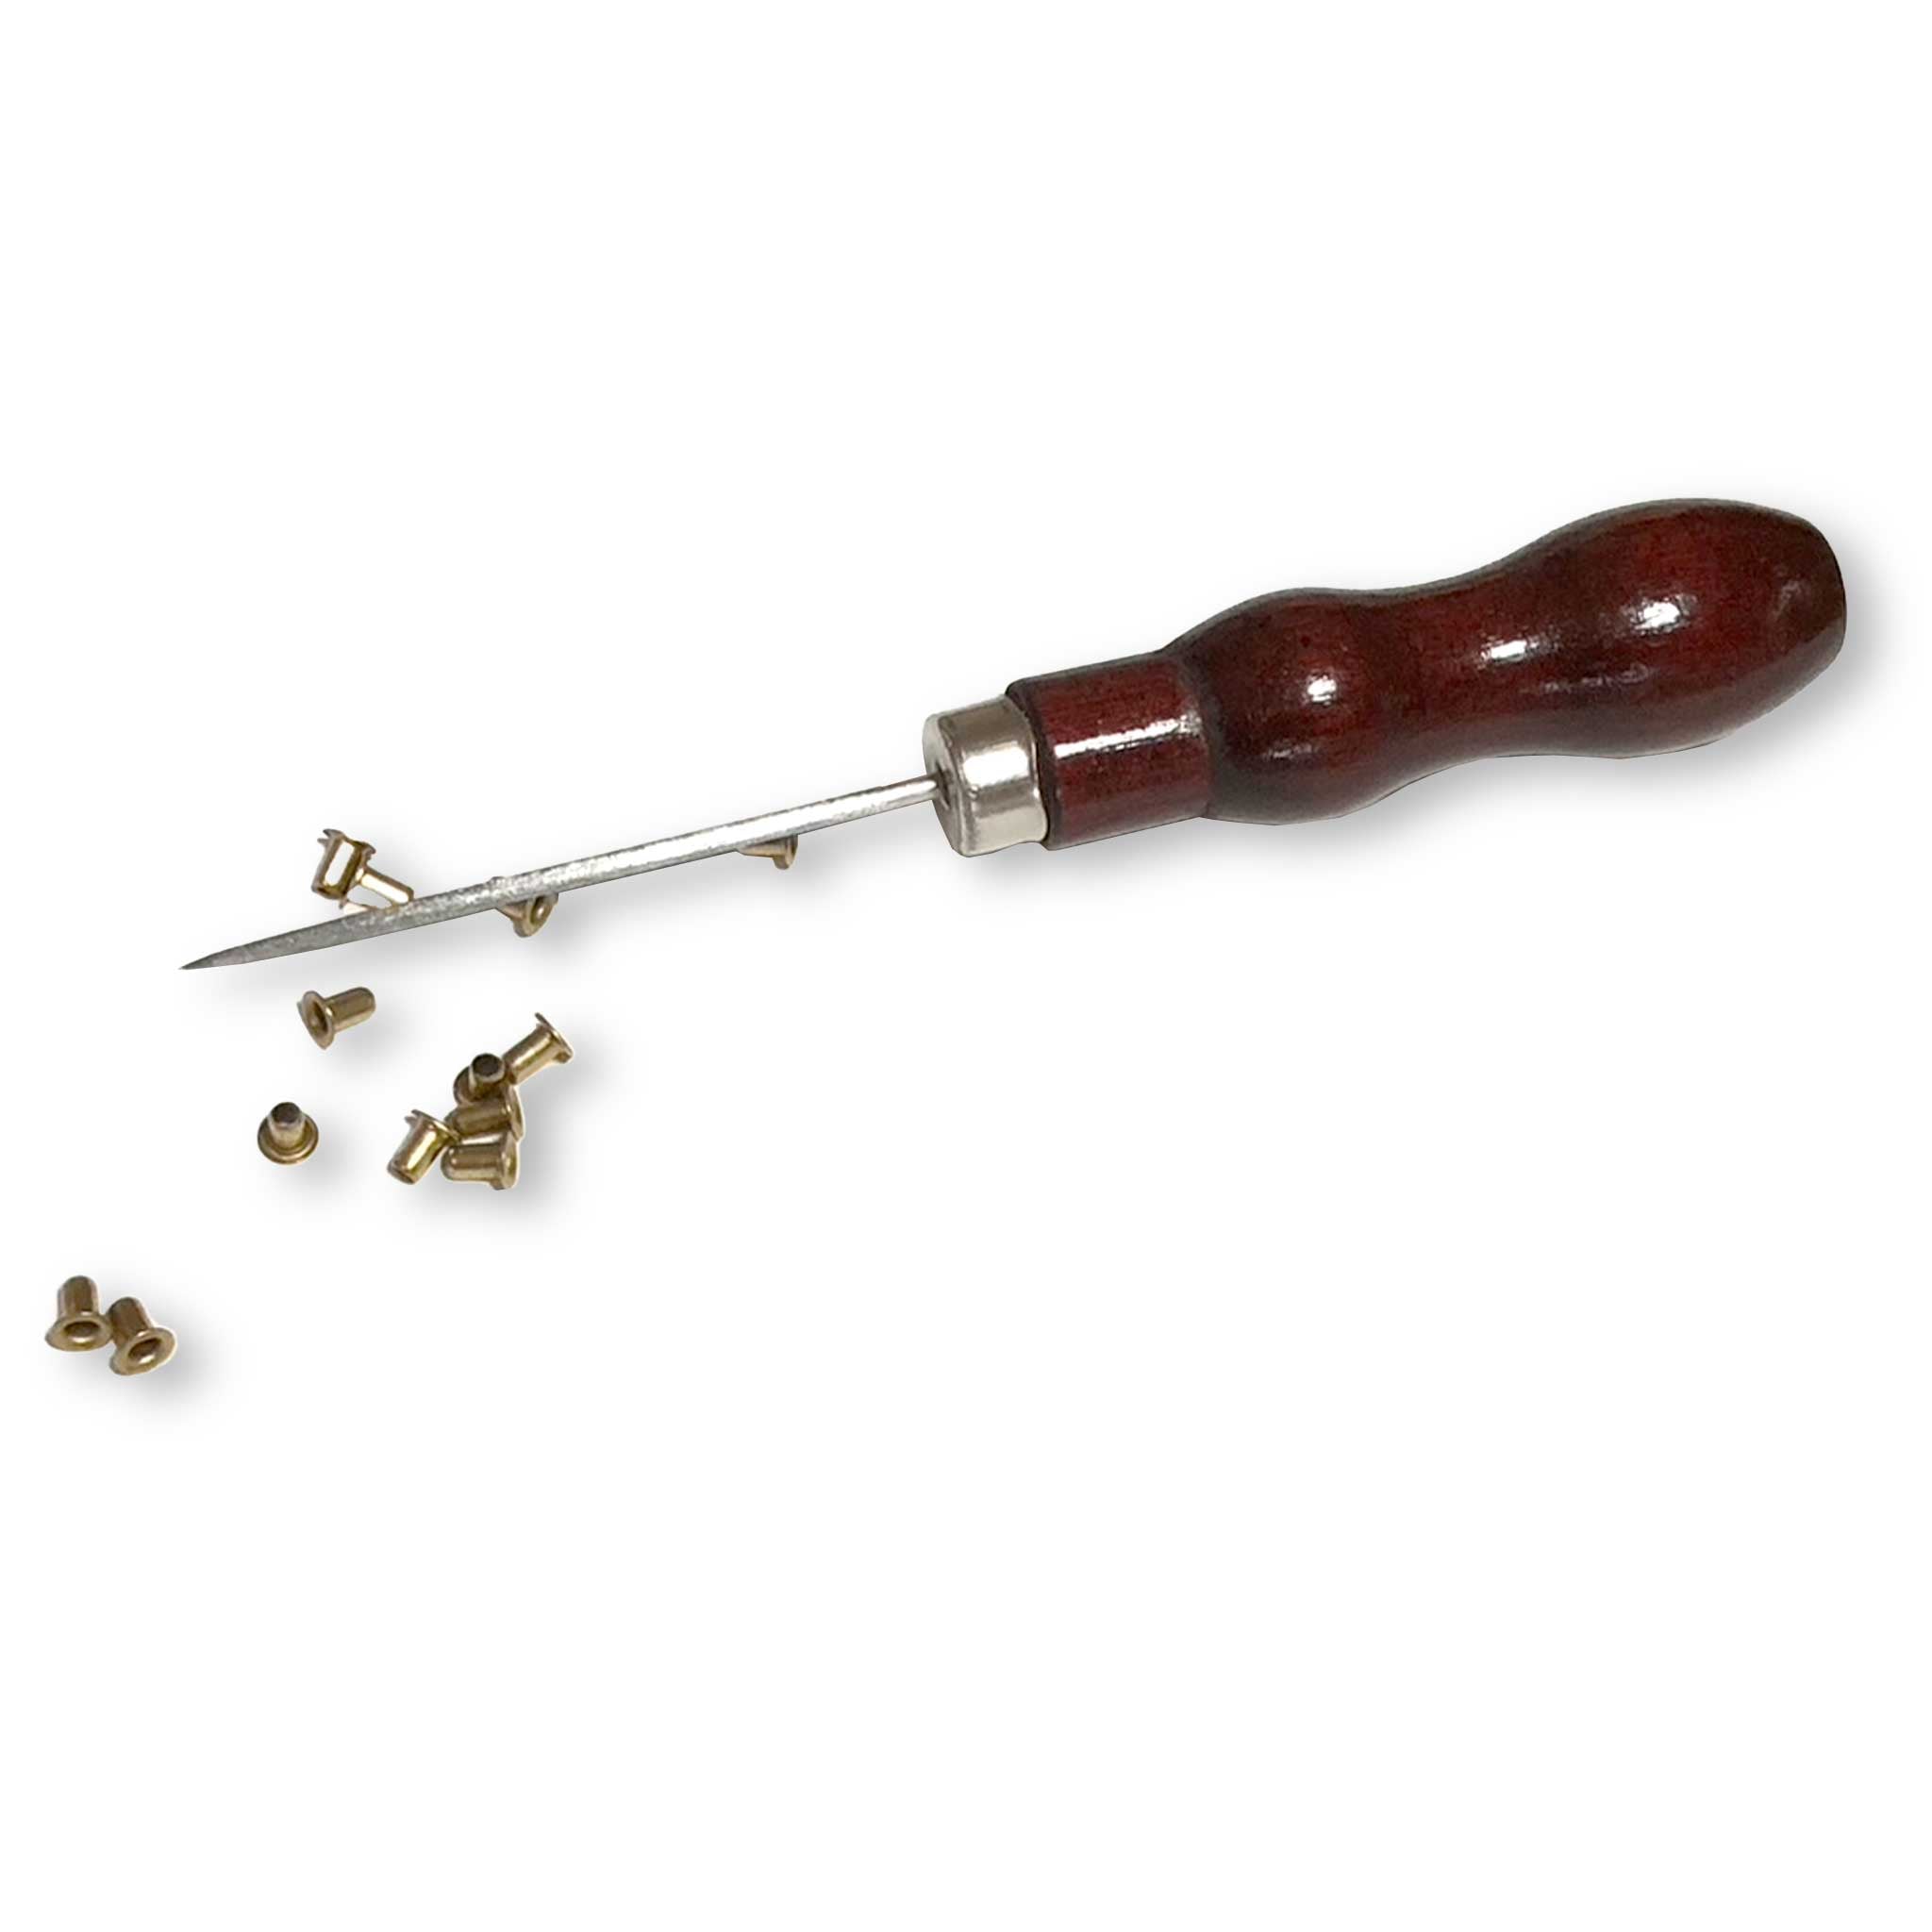 Eyelets Spike Embedding Tool for adding eyelets to a Frames Side Bar - Tools collection by Buzzbee Beekeeping Supplies